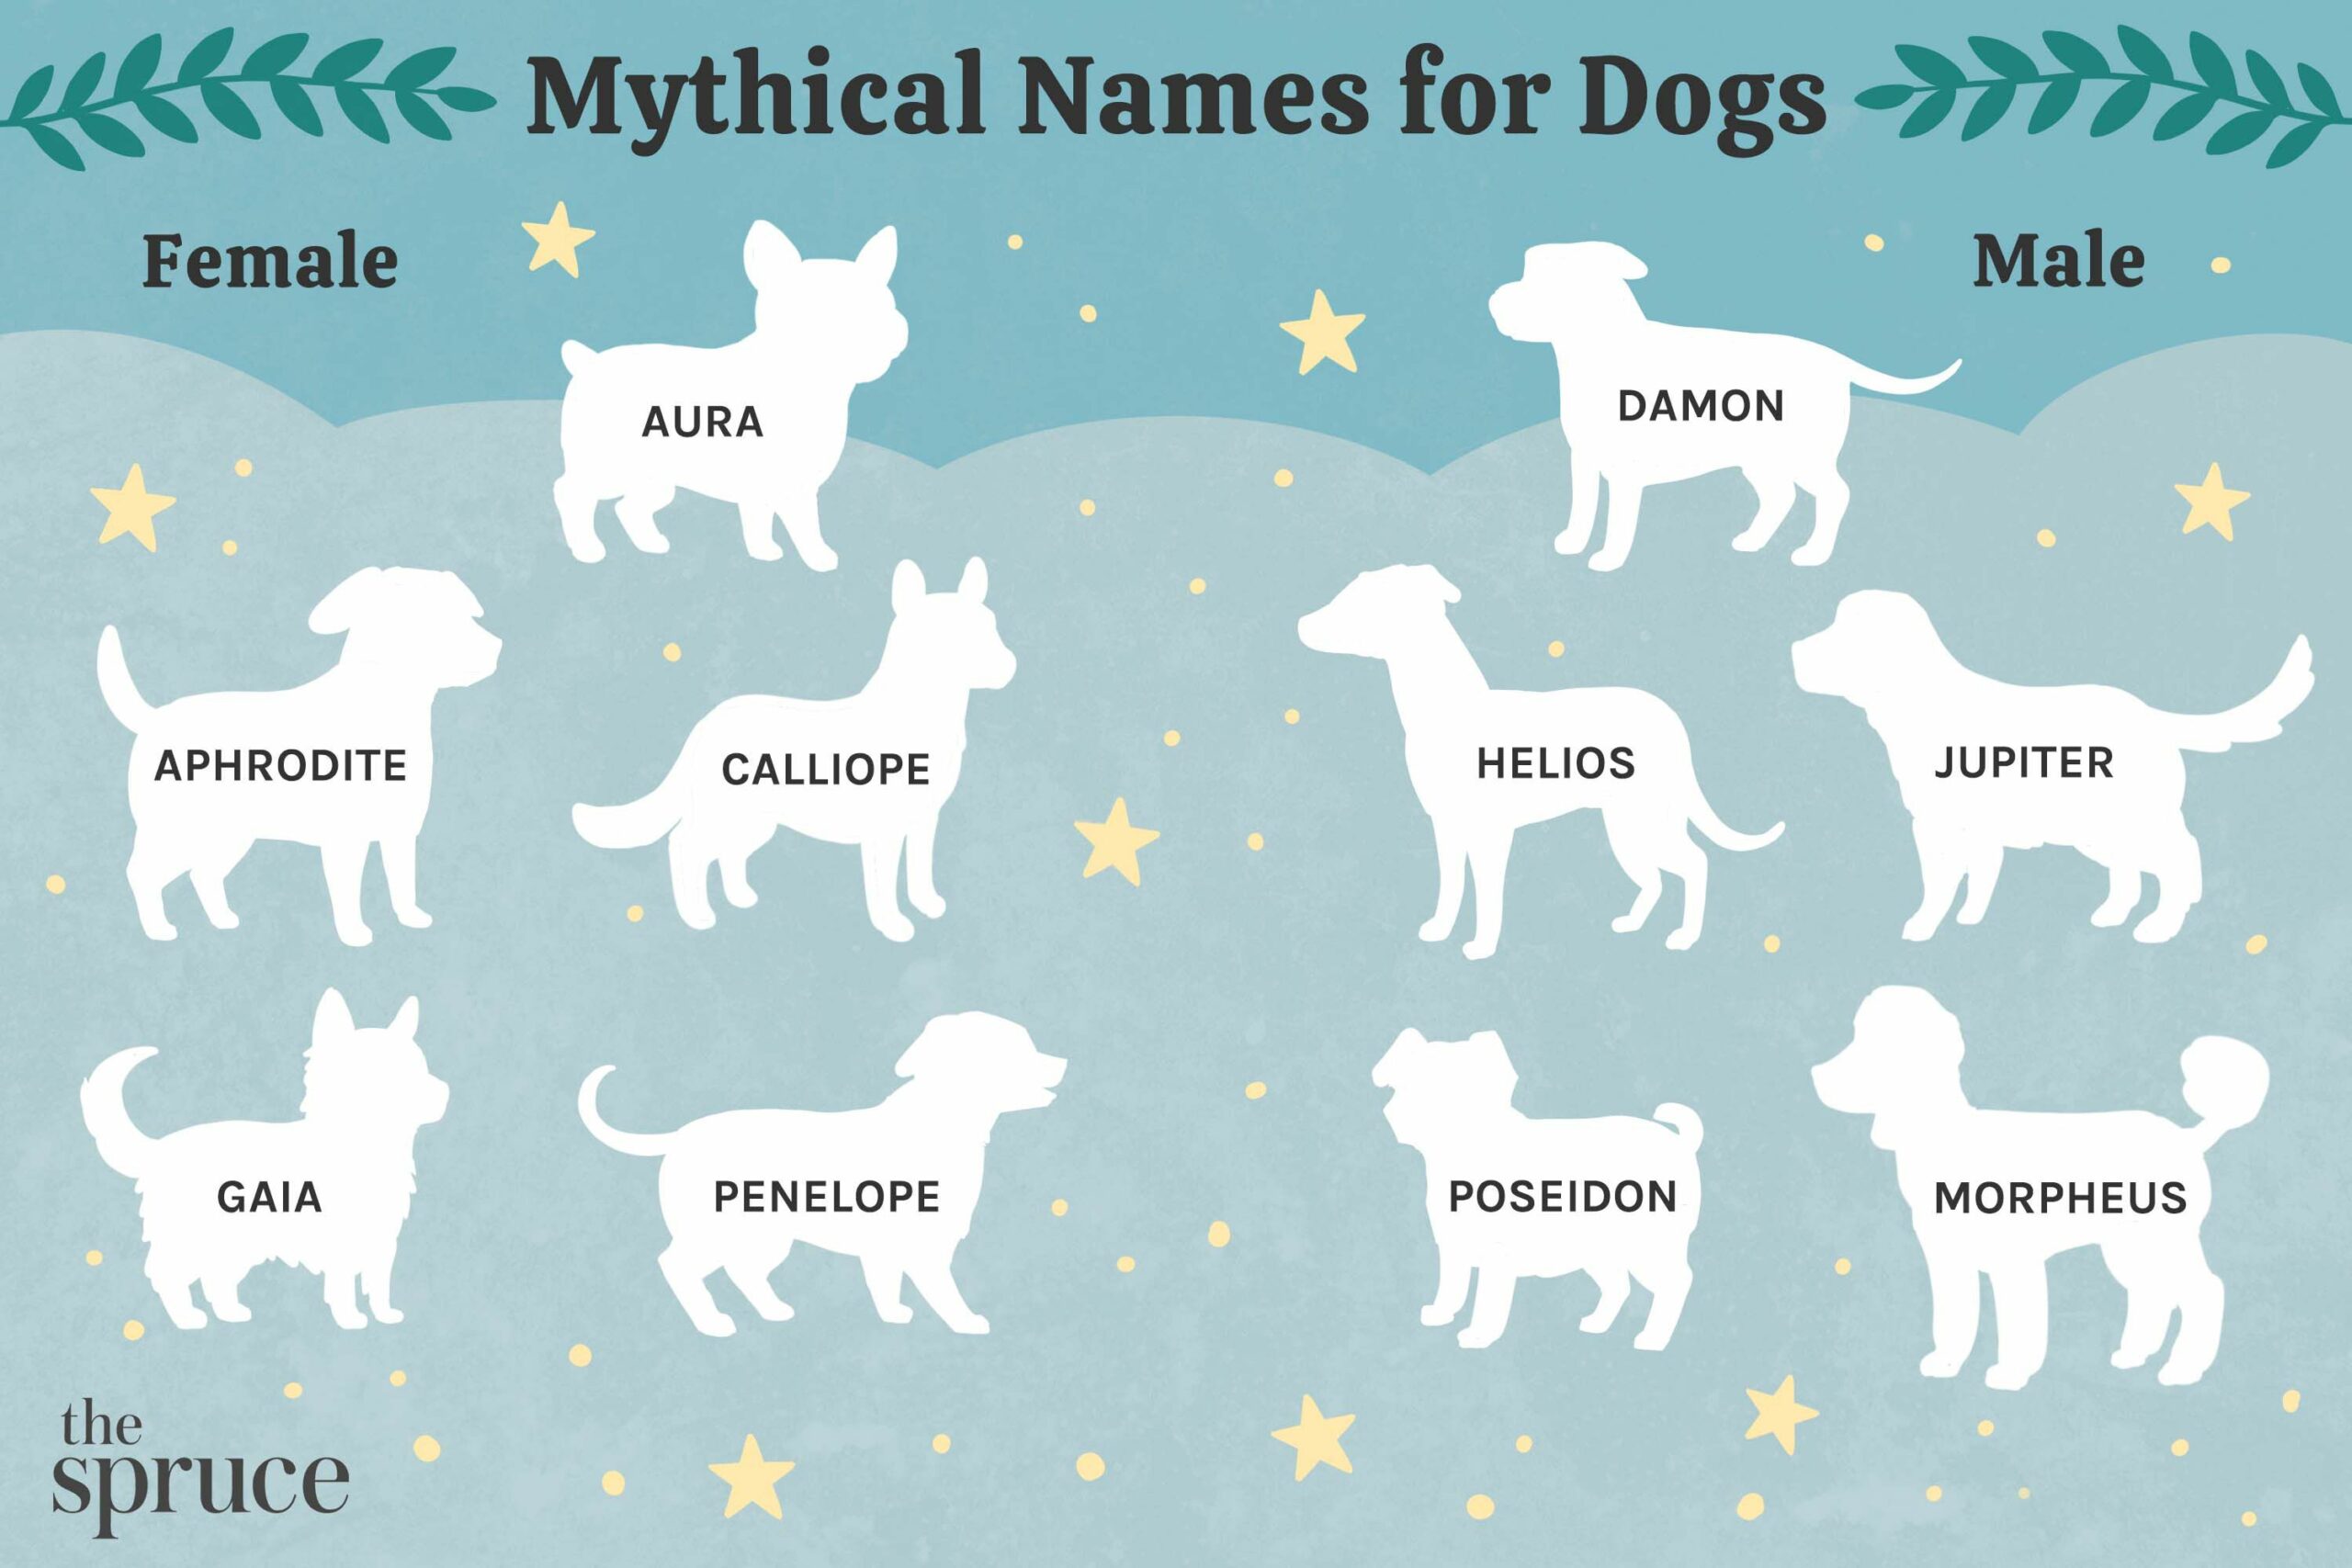 mythical names for dogs 4845296 V1 442679bc98664a60985f48384775e081 scaled